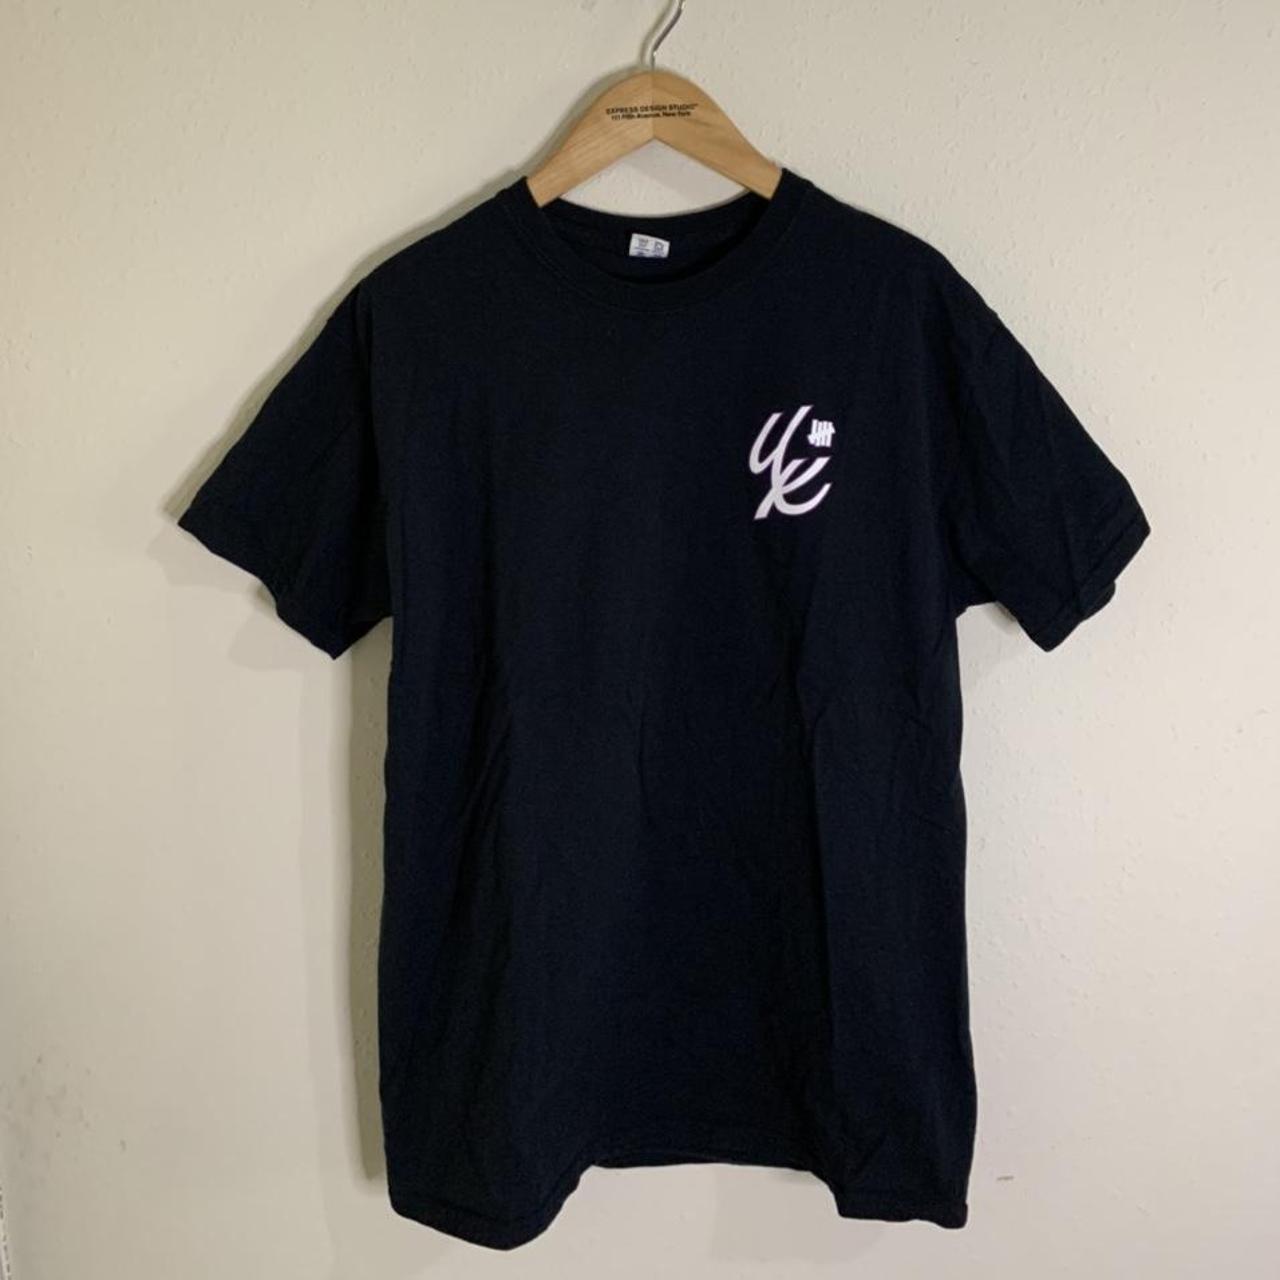 Product Image 1 - Undefeated Streetwear Kyoto Japan shirt